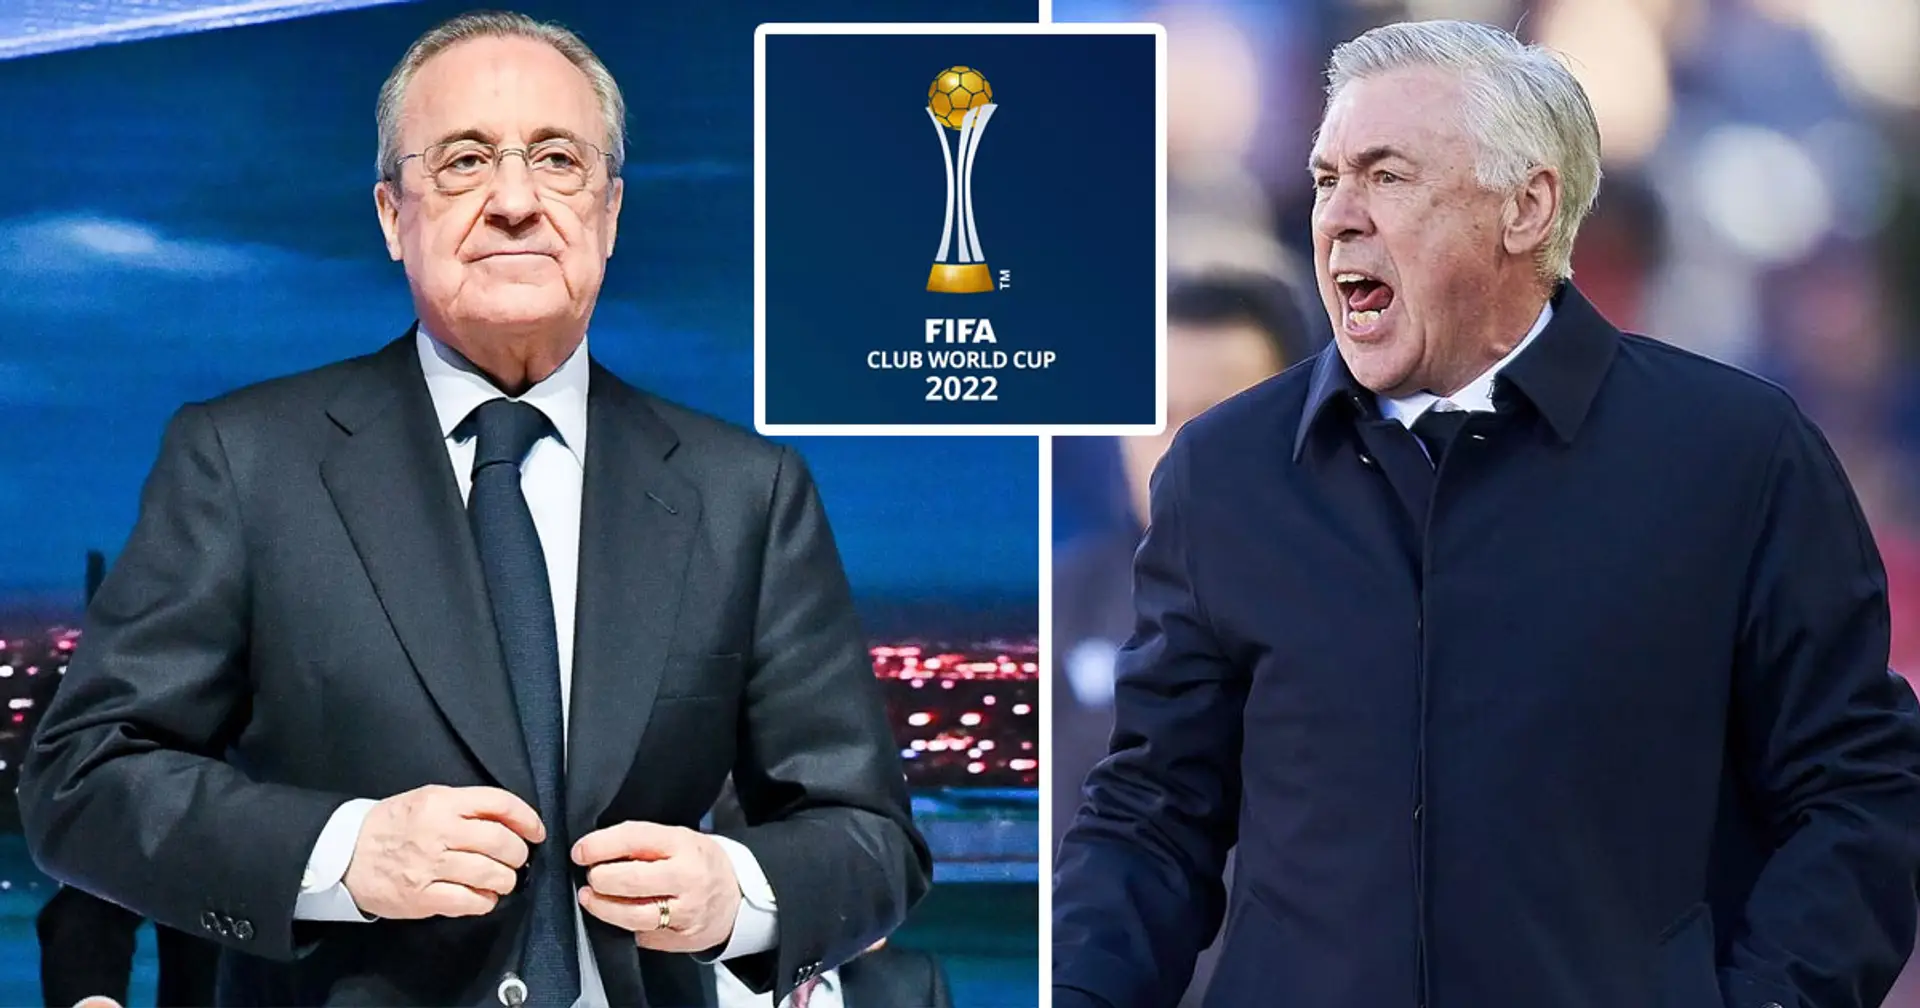 Ancelotti at risk of sacking if Real Madrid don't win Club World Cup: top source